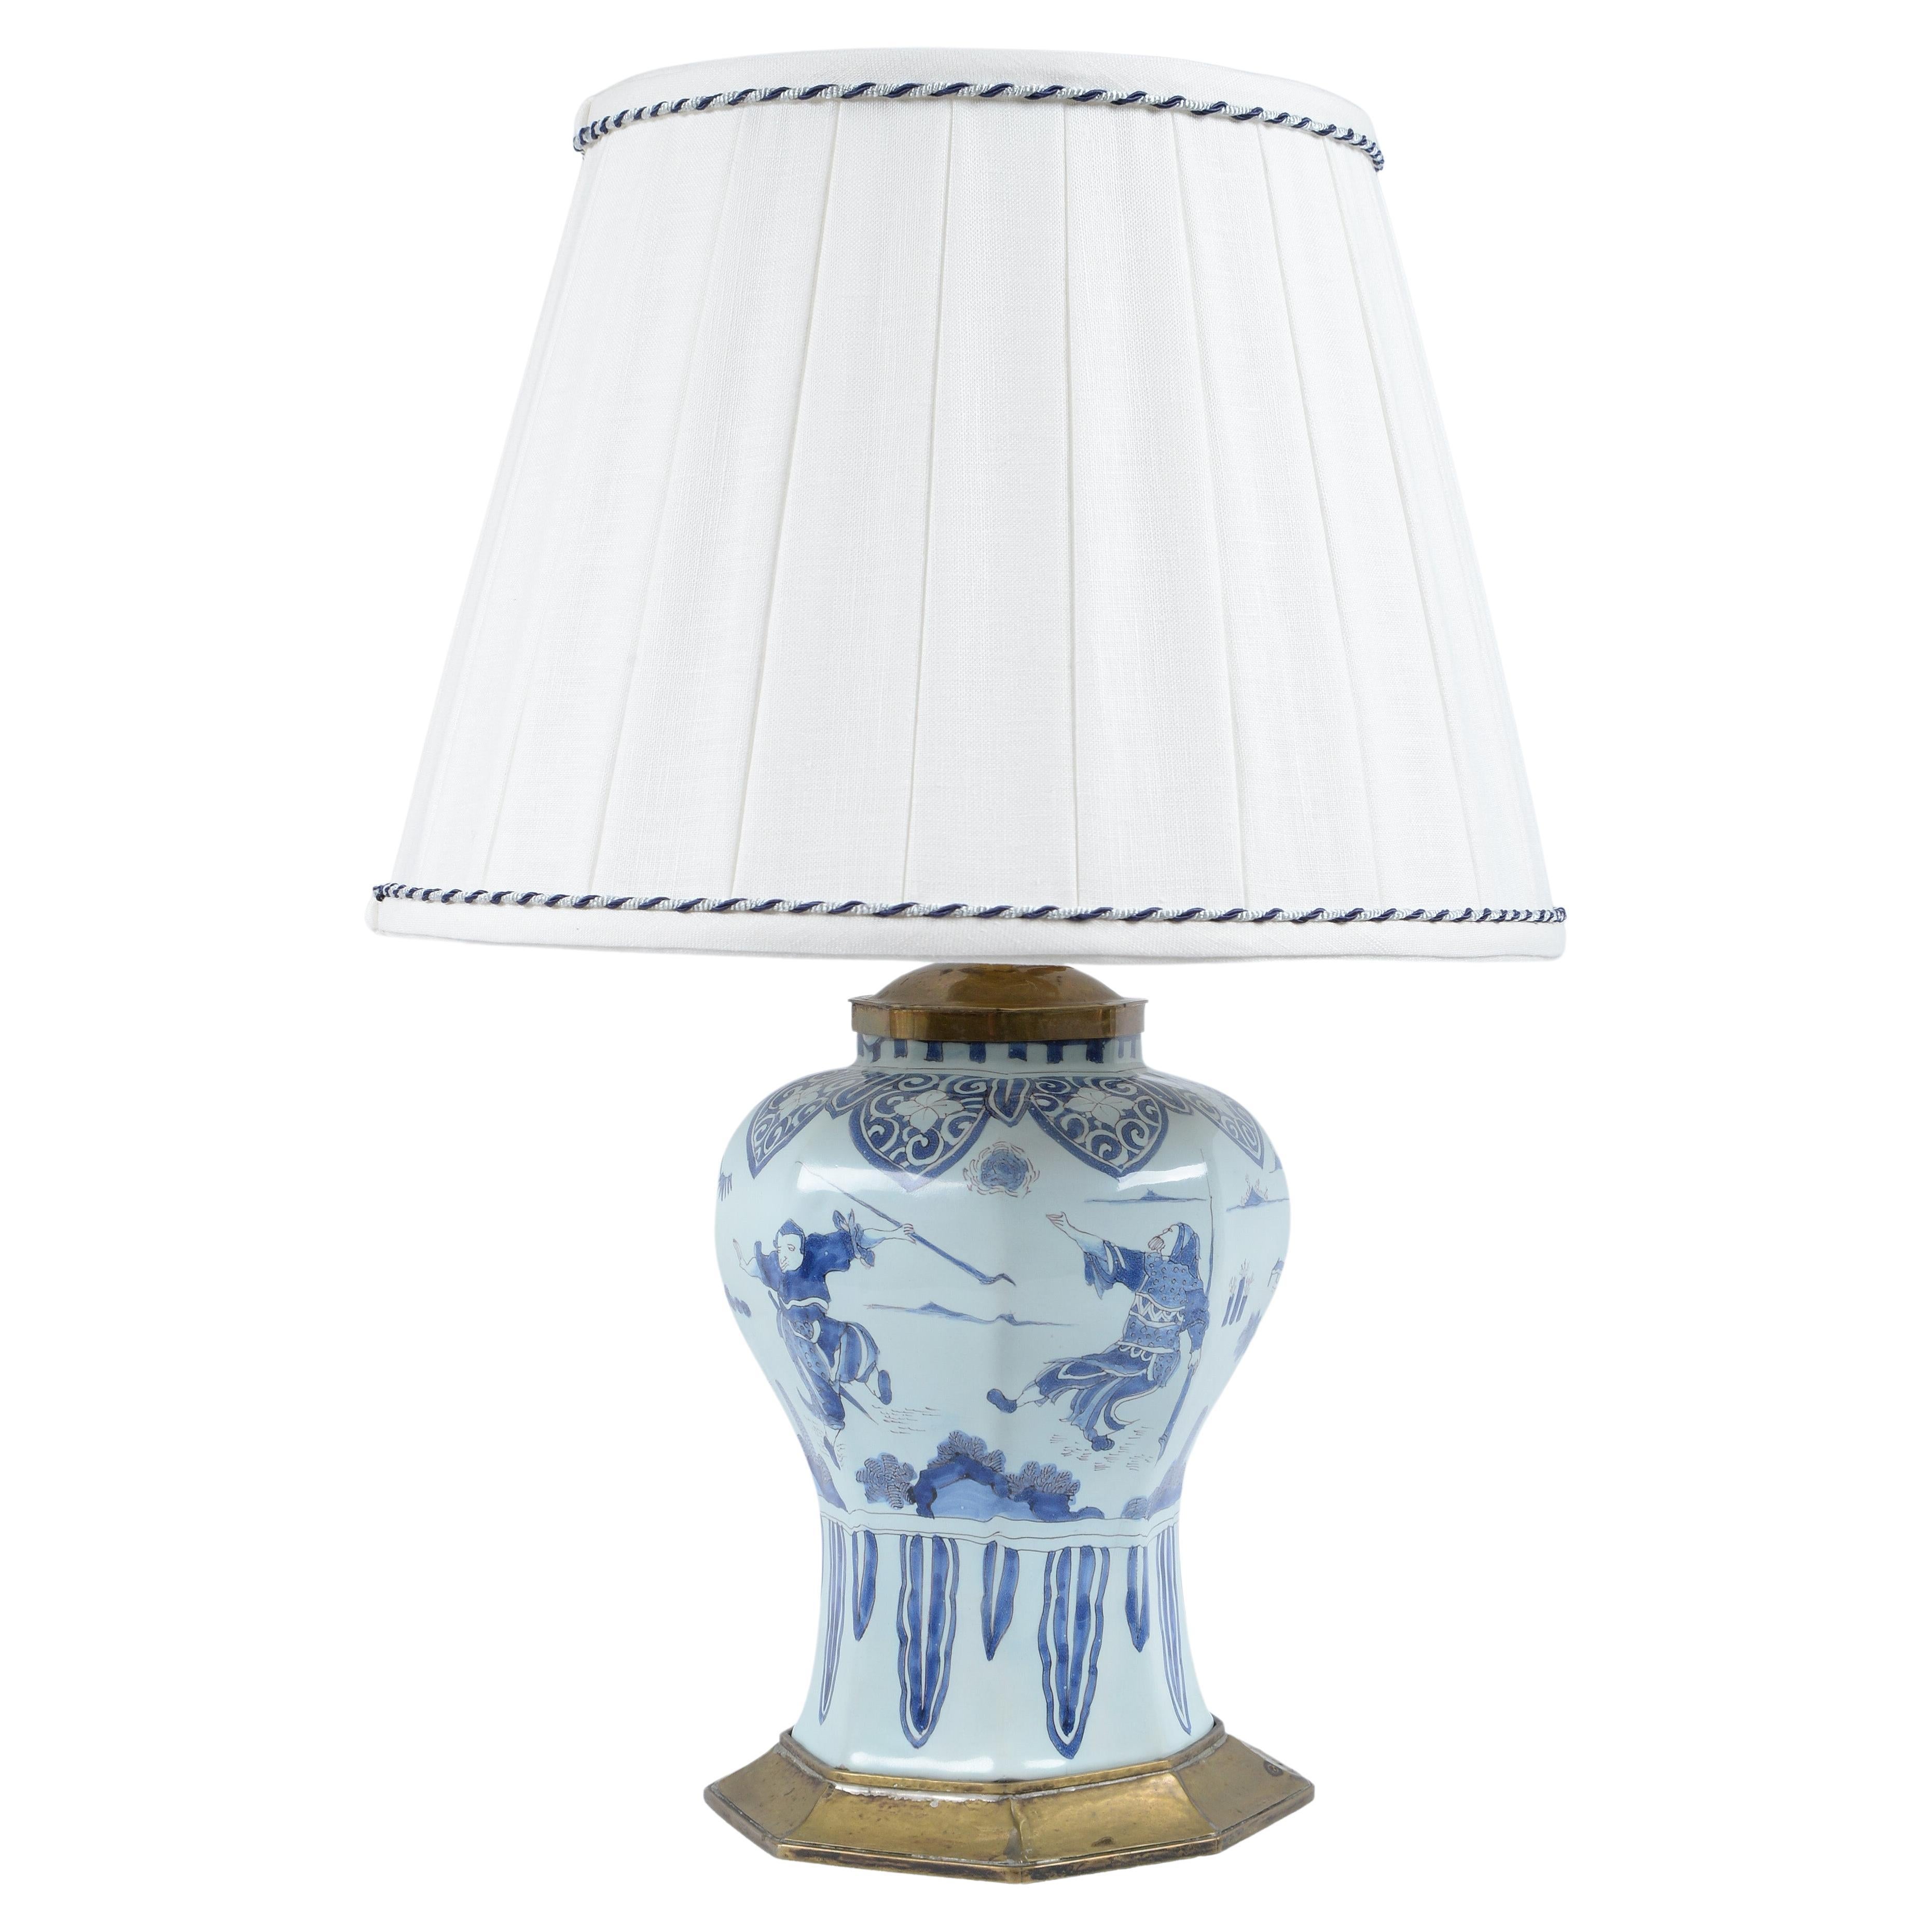 Delft Blue and White Chinoiserie Faience Vase Mounted as a Lamp For Sale